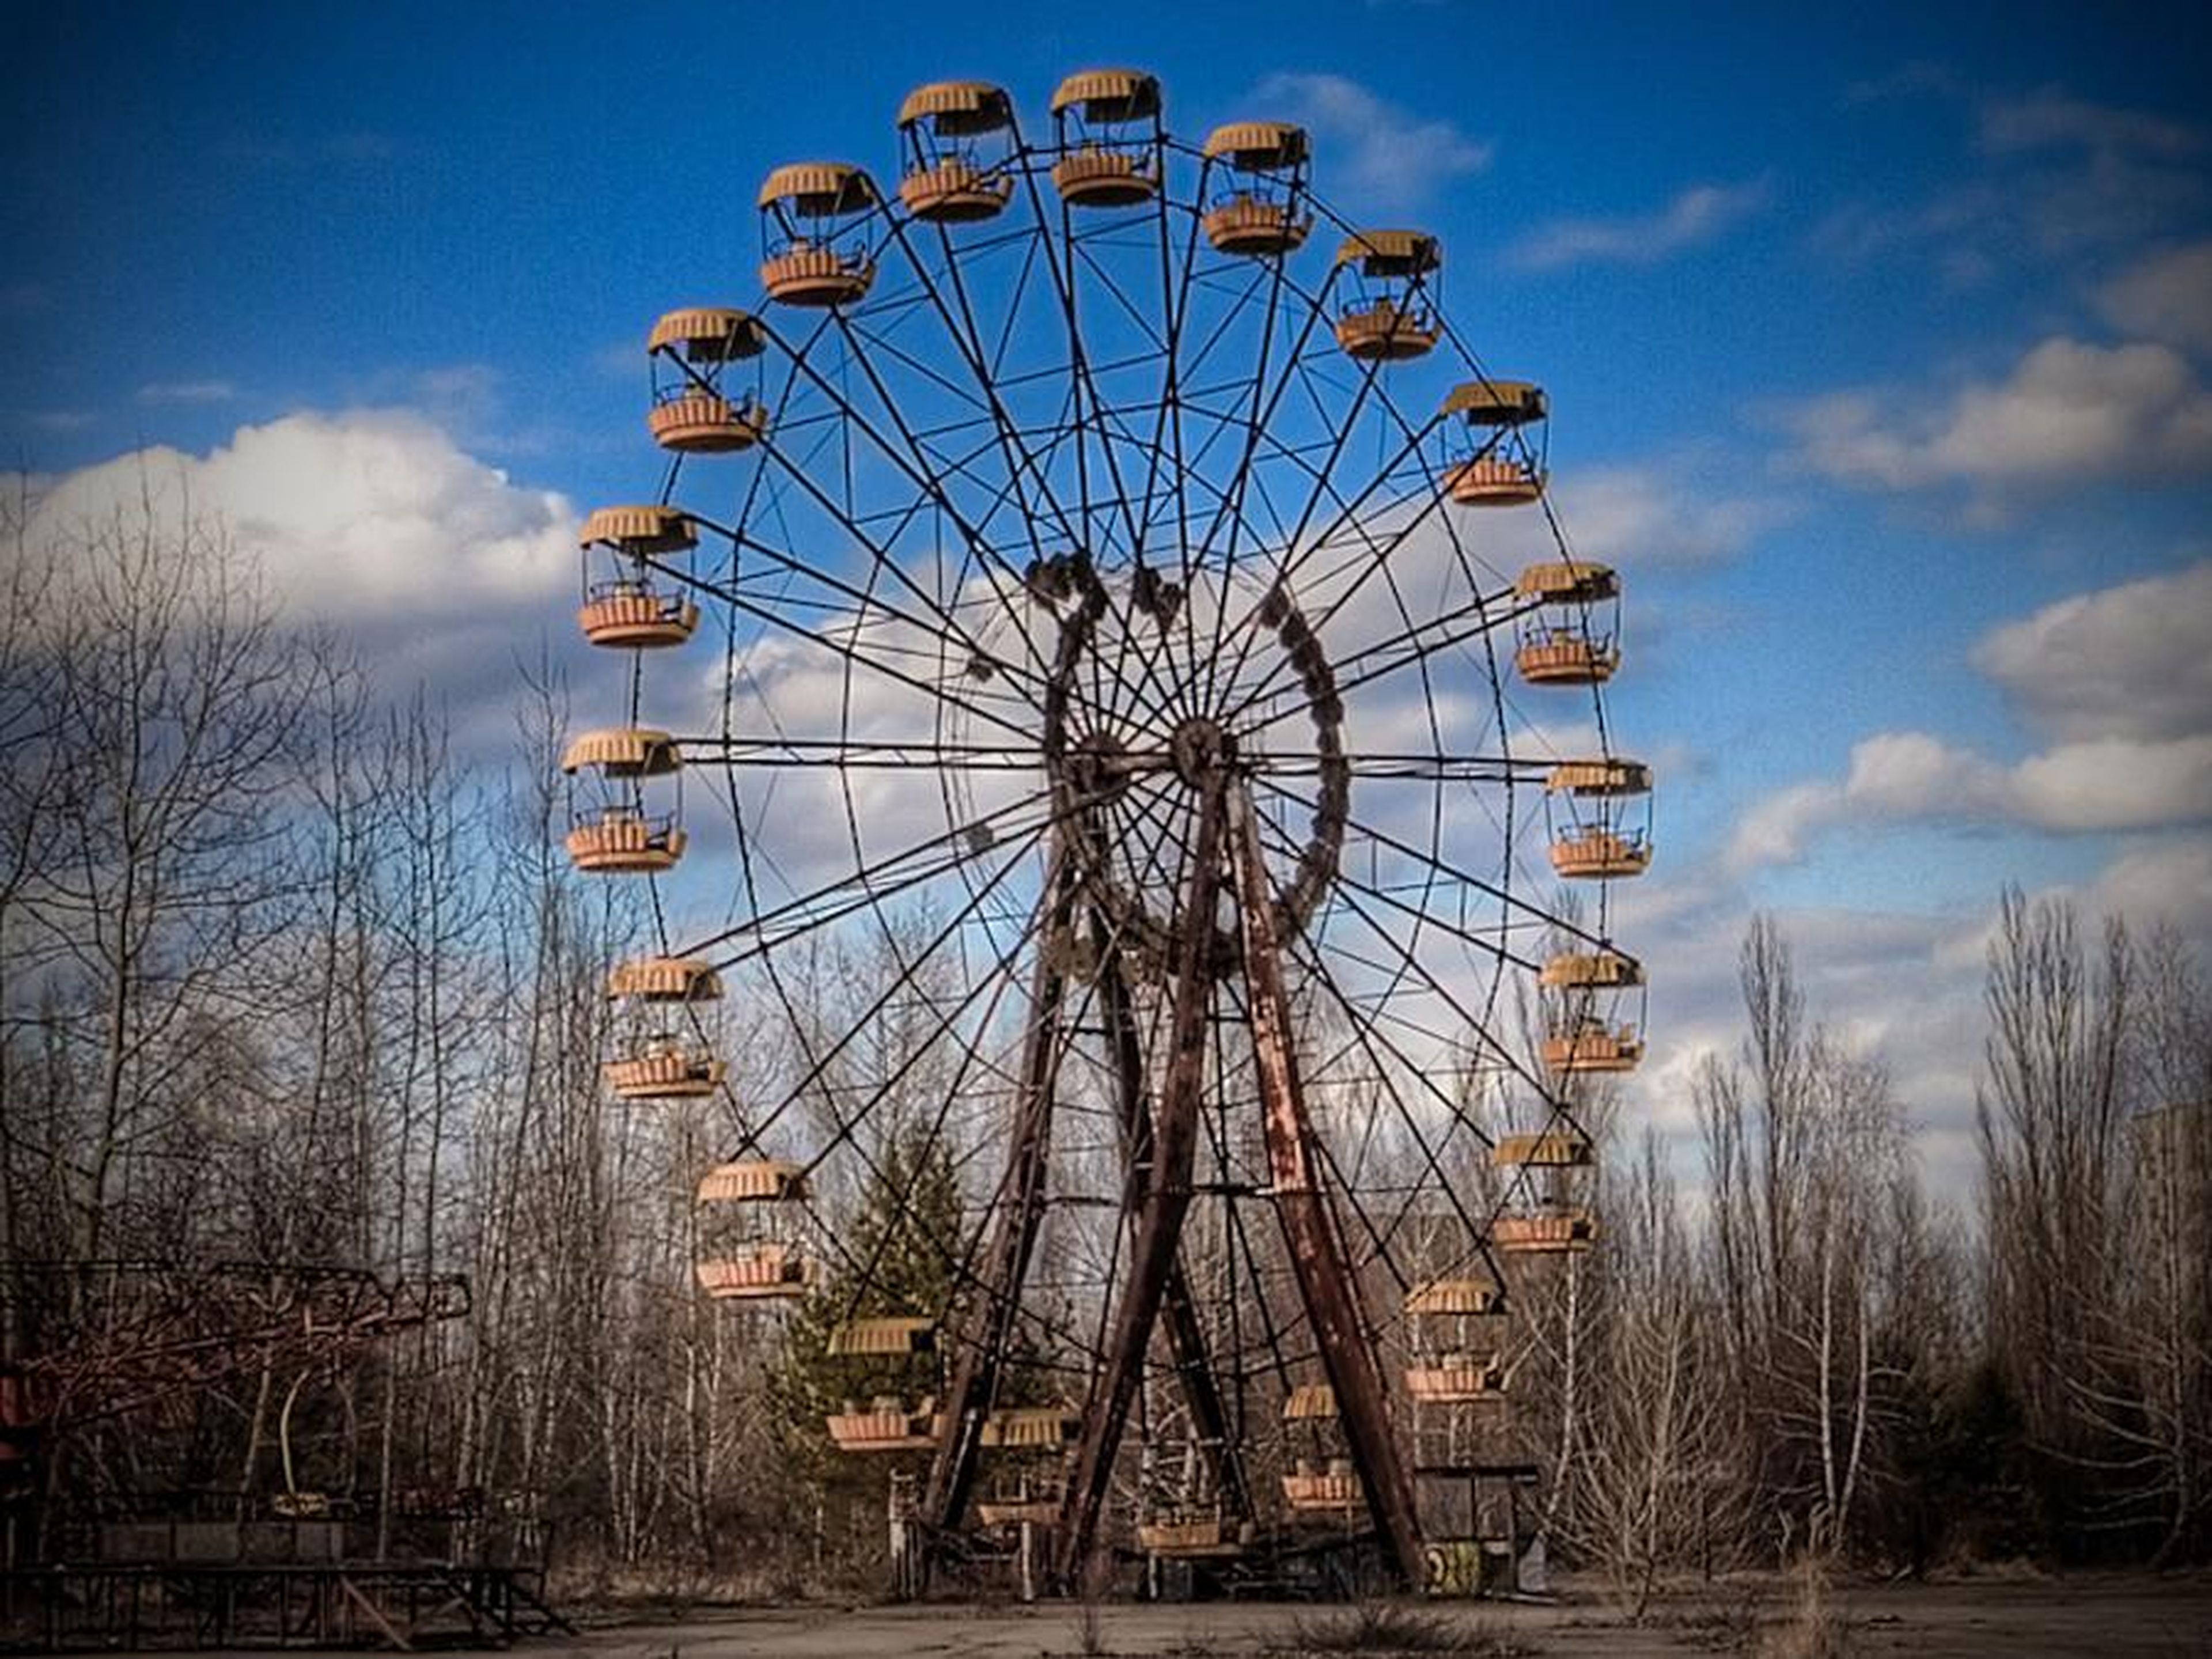 Some reports say a brand-new Ferris wheel opened early to entertain residents after the accident.